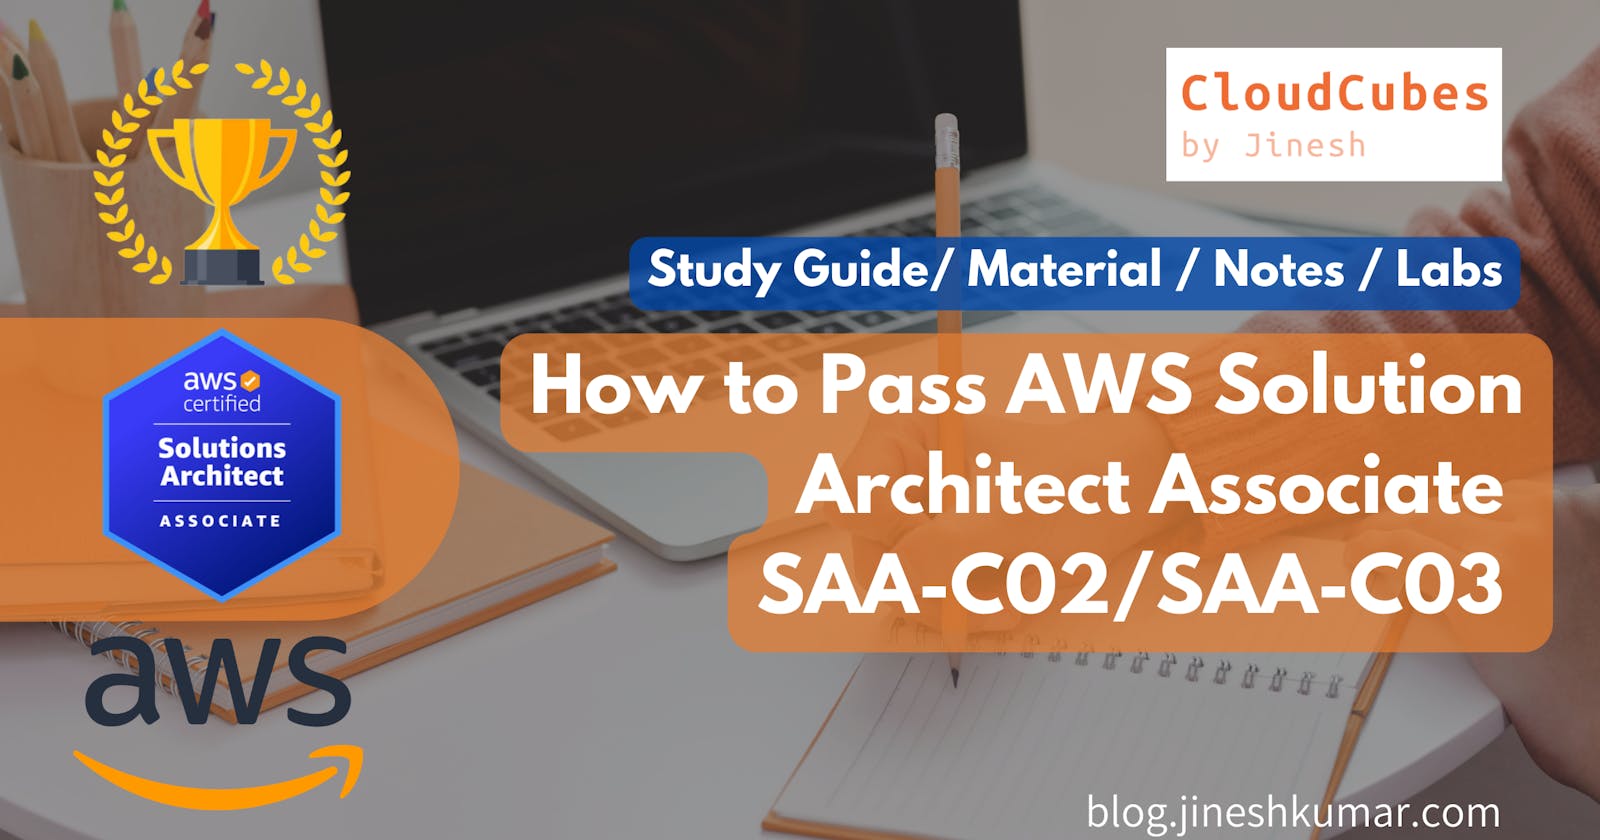 How to Pass AWS Solution Architect Associate SAA-C02/SAA-C03 in 2022-2023